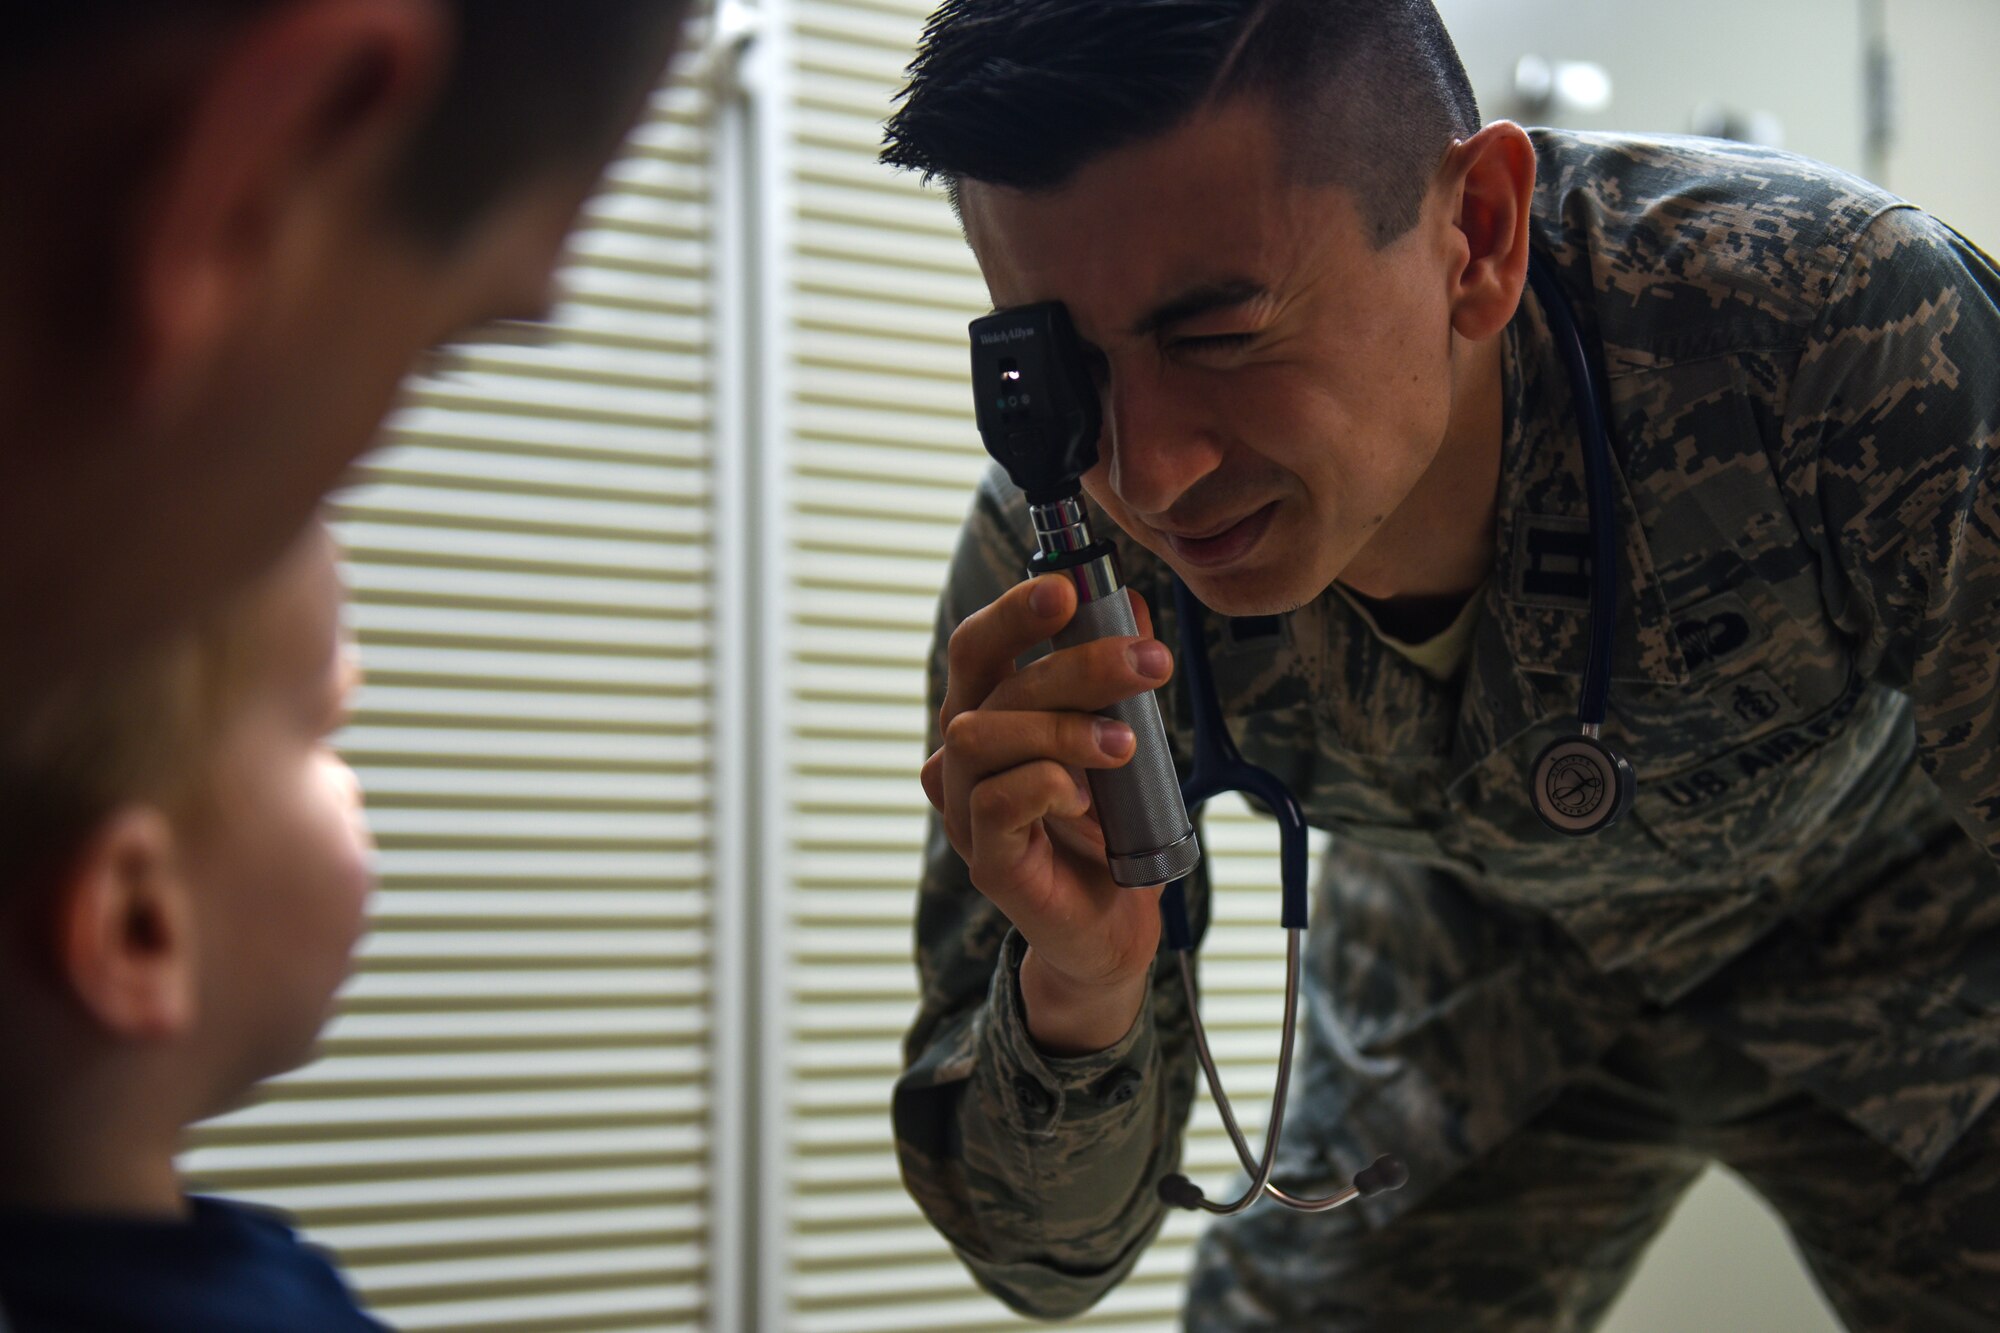 U.S. Air Force Capt. Joseph Migliuri, 92nd Medical Group pediatrician, performs a wellness vision exam during a patient’s check-up at Fairchild Air Force Base, Wash., April 4, 2018. The pediatric team implemented a new concept of operations: rewarding, efficiency, setting priorities and empowering team members, or RESET, to their system of patient care. The integration of RESET in the Military Health System Genesis workflow has improved the clinic’s goals of patient access and care. (U.S. Air Force photo by Airman 1st Class Whitney Laine)